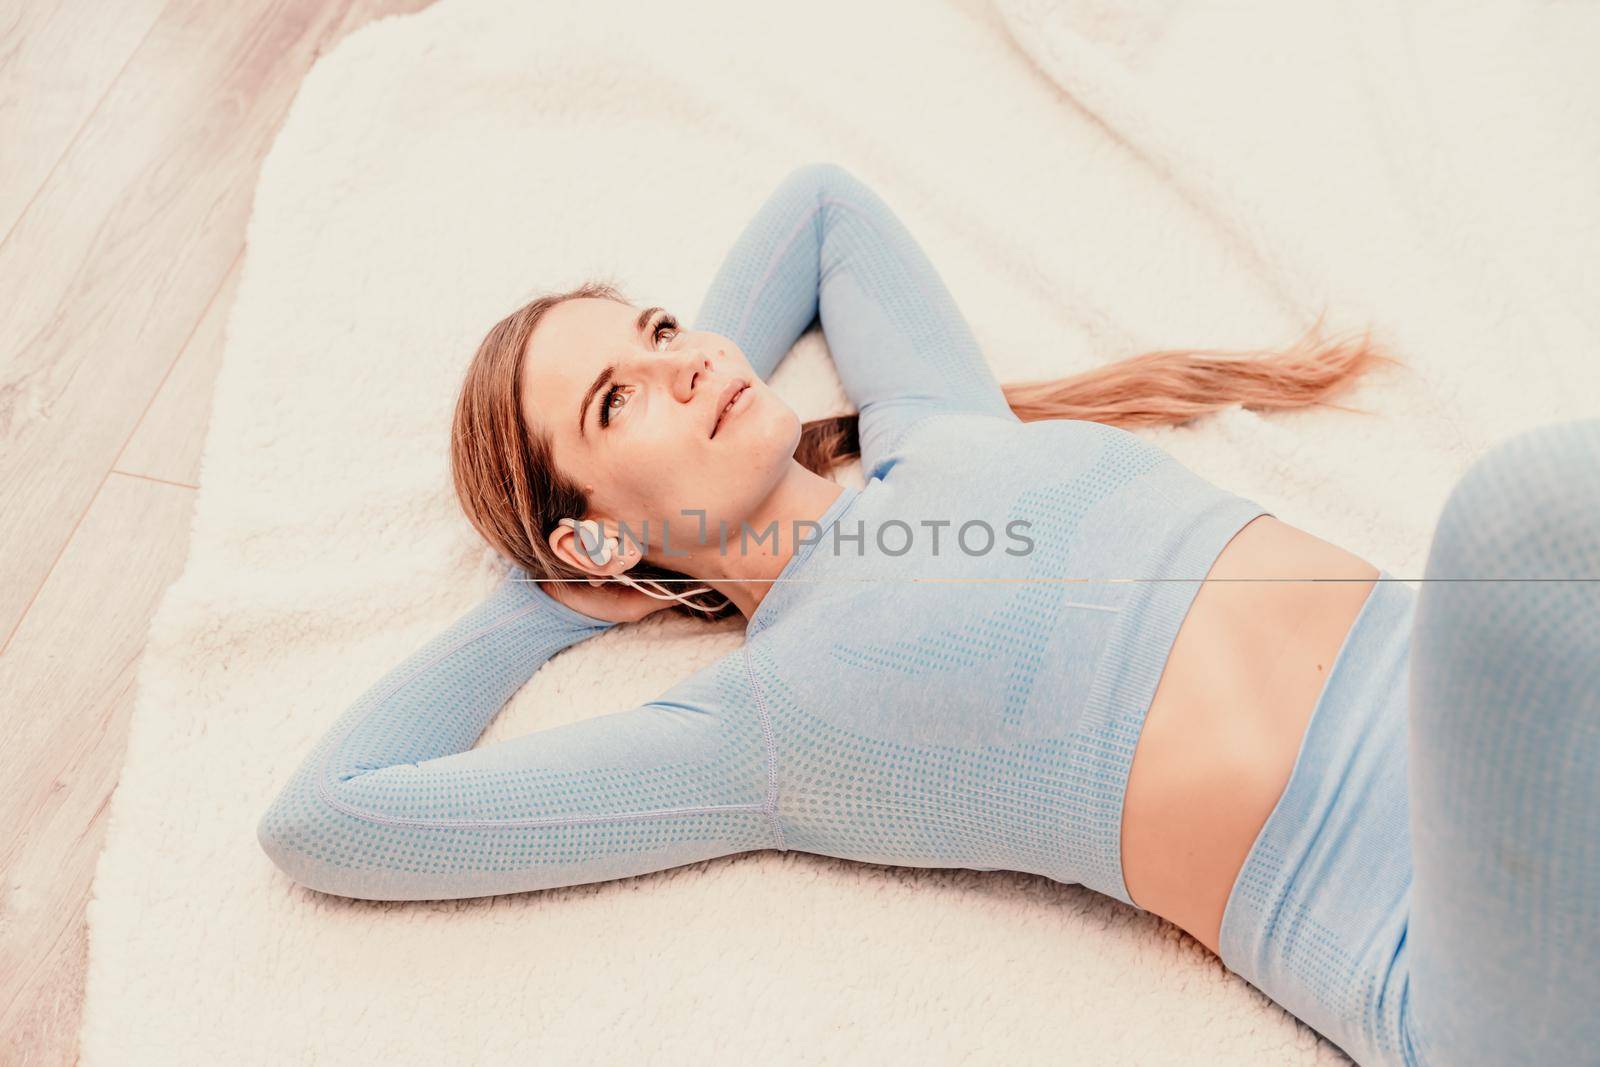 Top view portrait of relaxed woman listening to music with headphones lying on carpet at home. She is dressed in a blue tracksuit